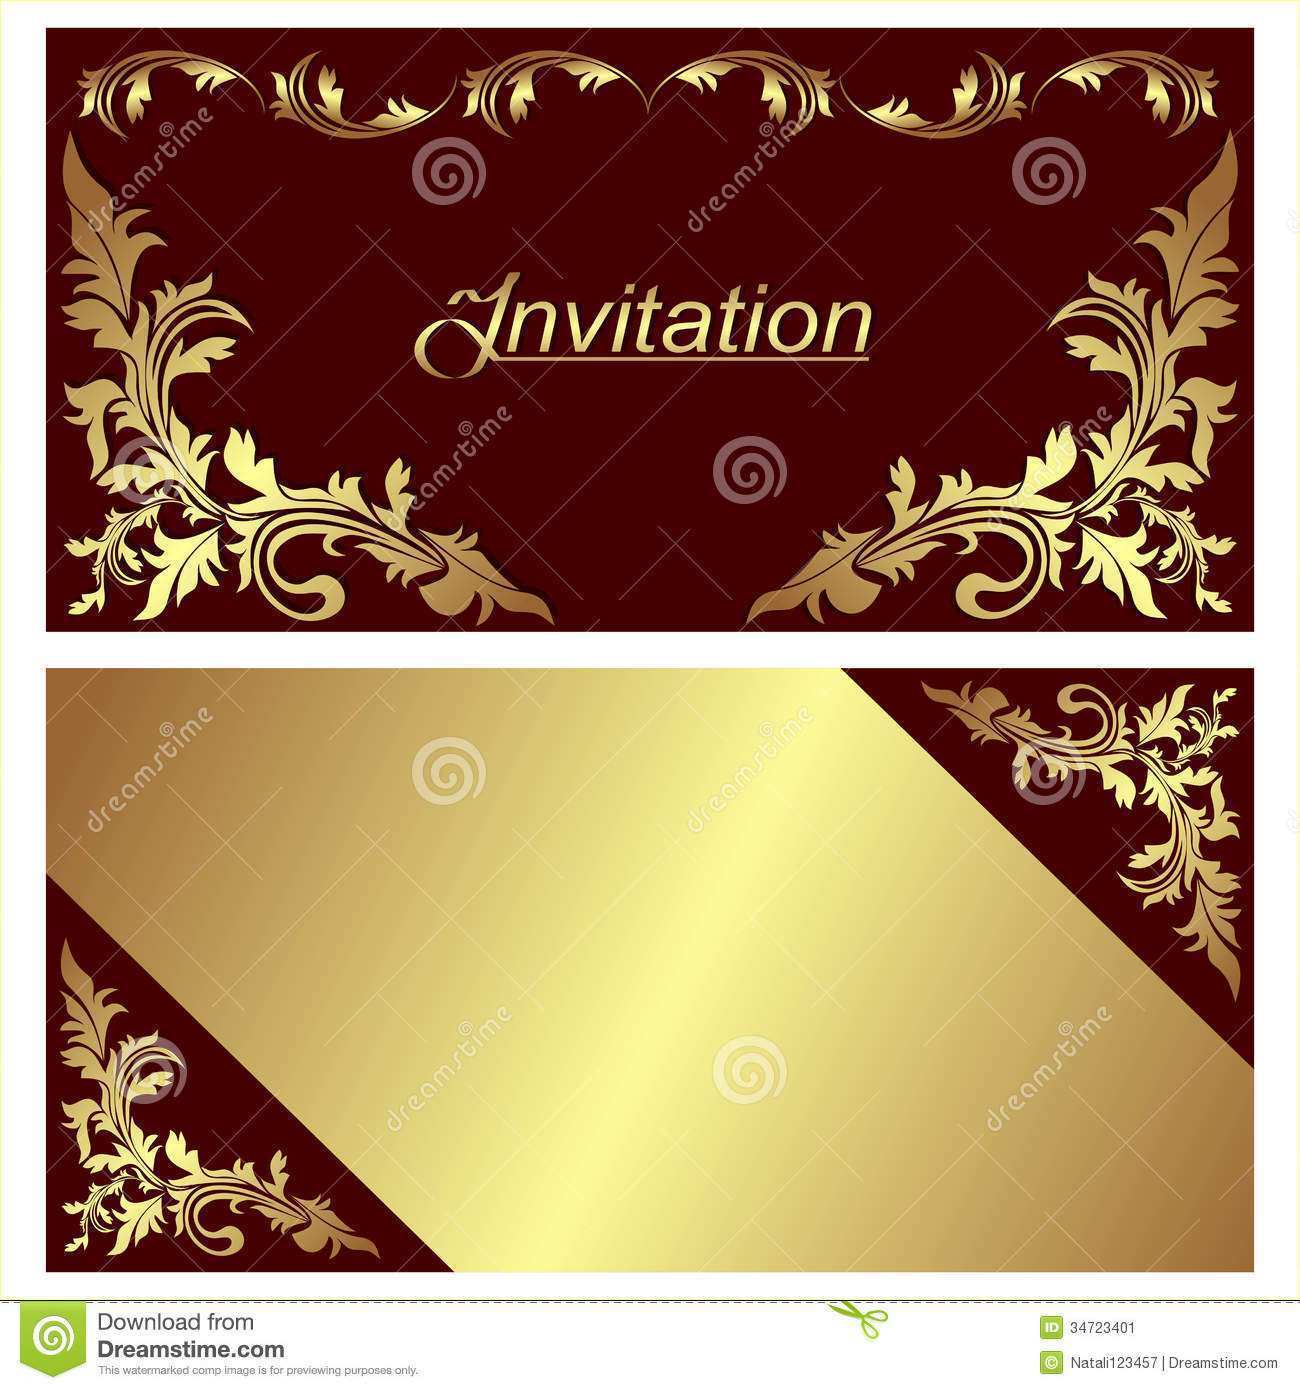 15 Free Invitation Card Designs Images in Word for Invitation Card Designs Images